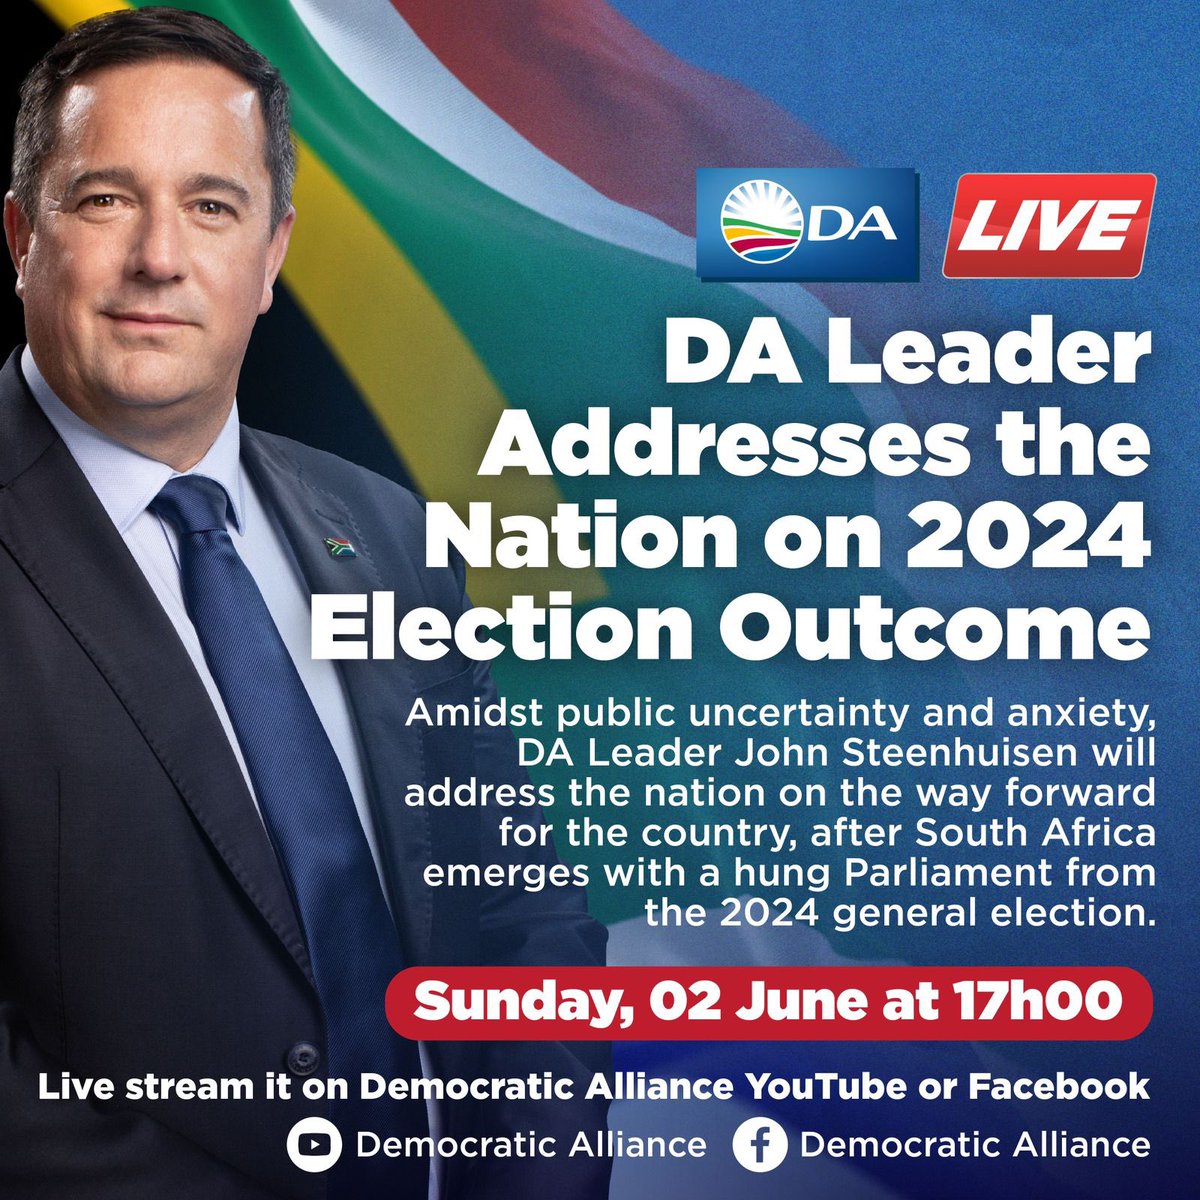 📺Tune today at 17h00. Amidst public uncertainty and anxiety, DA Leader John Steenhuisen will address the nation on the way forward for the country, after SA emerges with a hung Parliament. Watch it on the DA's Facebook or YouTube pages: youtube.com/live/Y1kzhCTxE… #ElectionResults